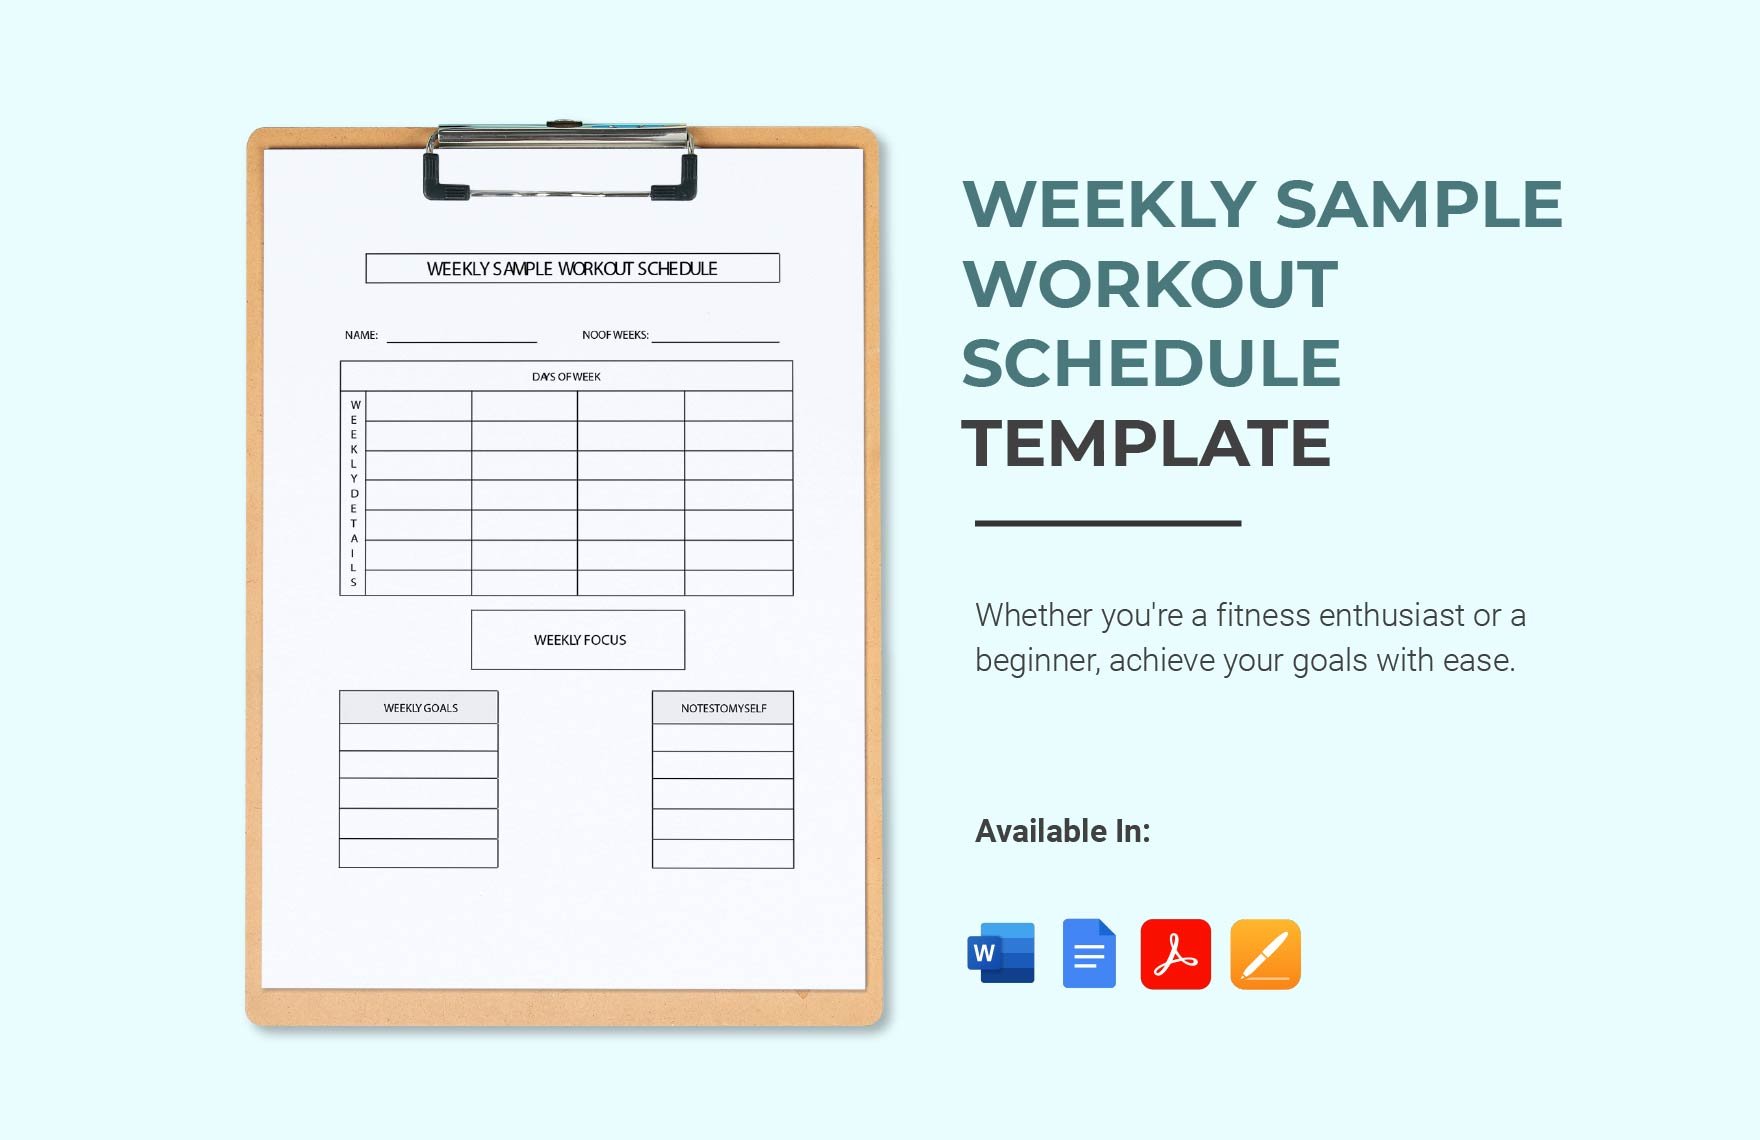 Weekly Sample Workout Schedule Template